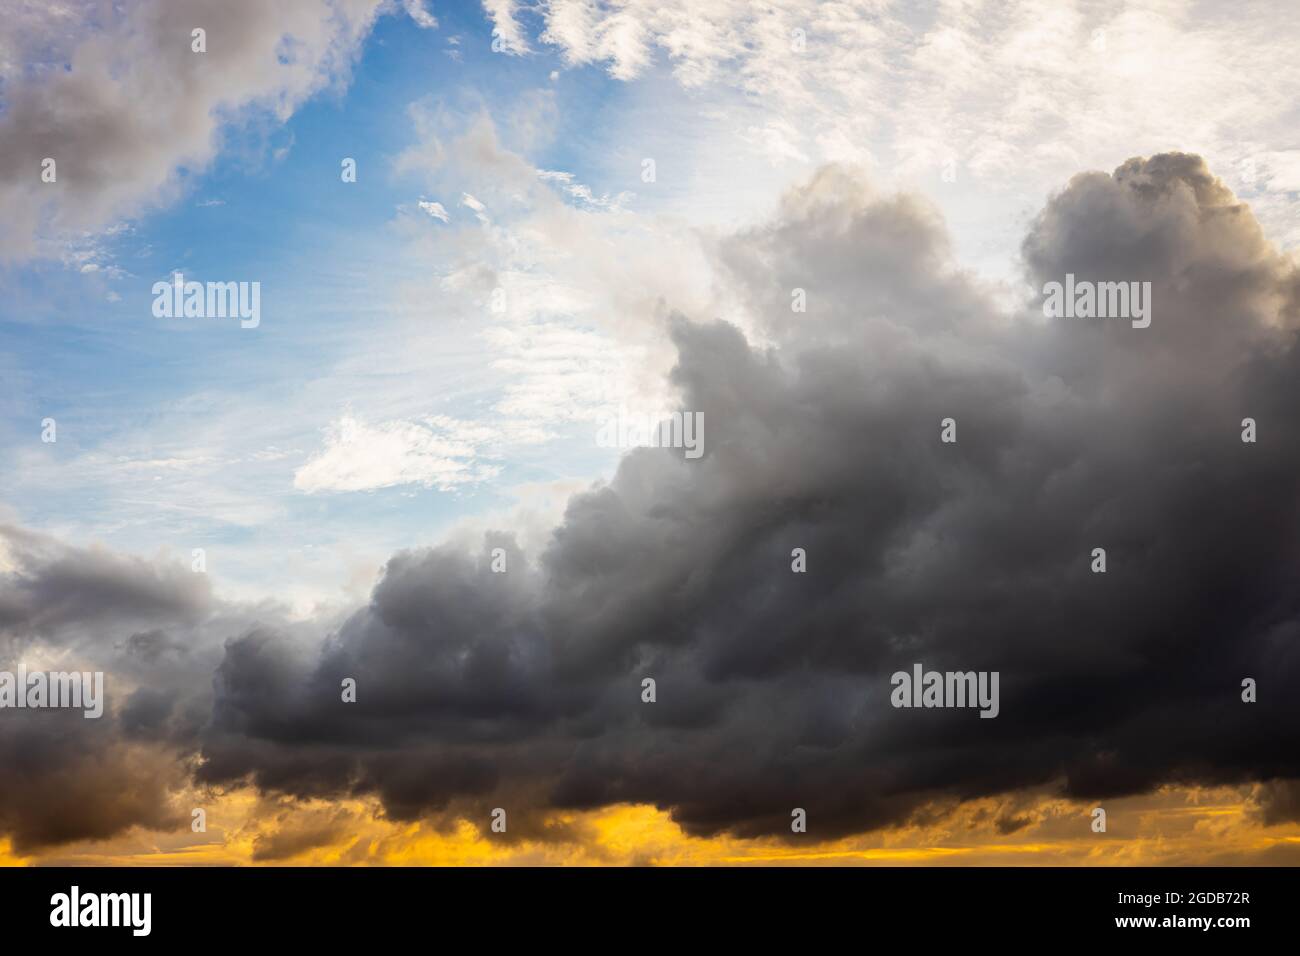 large darkness cloud in the sky with difference sky color from light refraction. Stock Photo